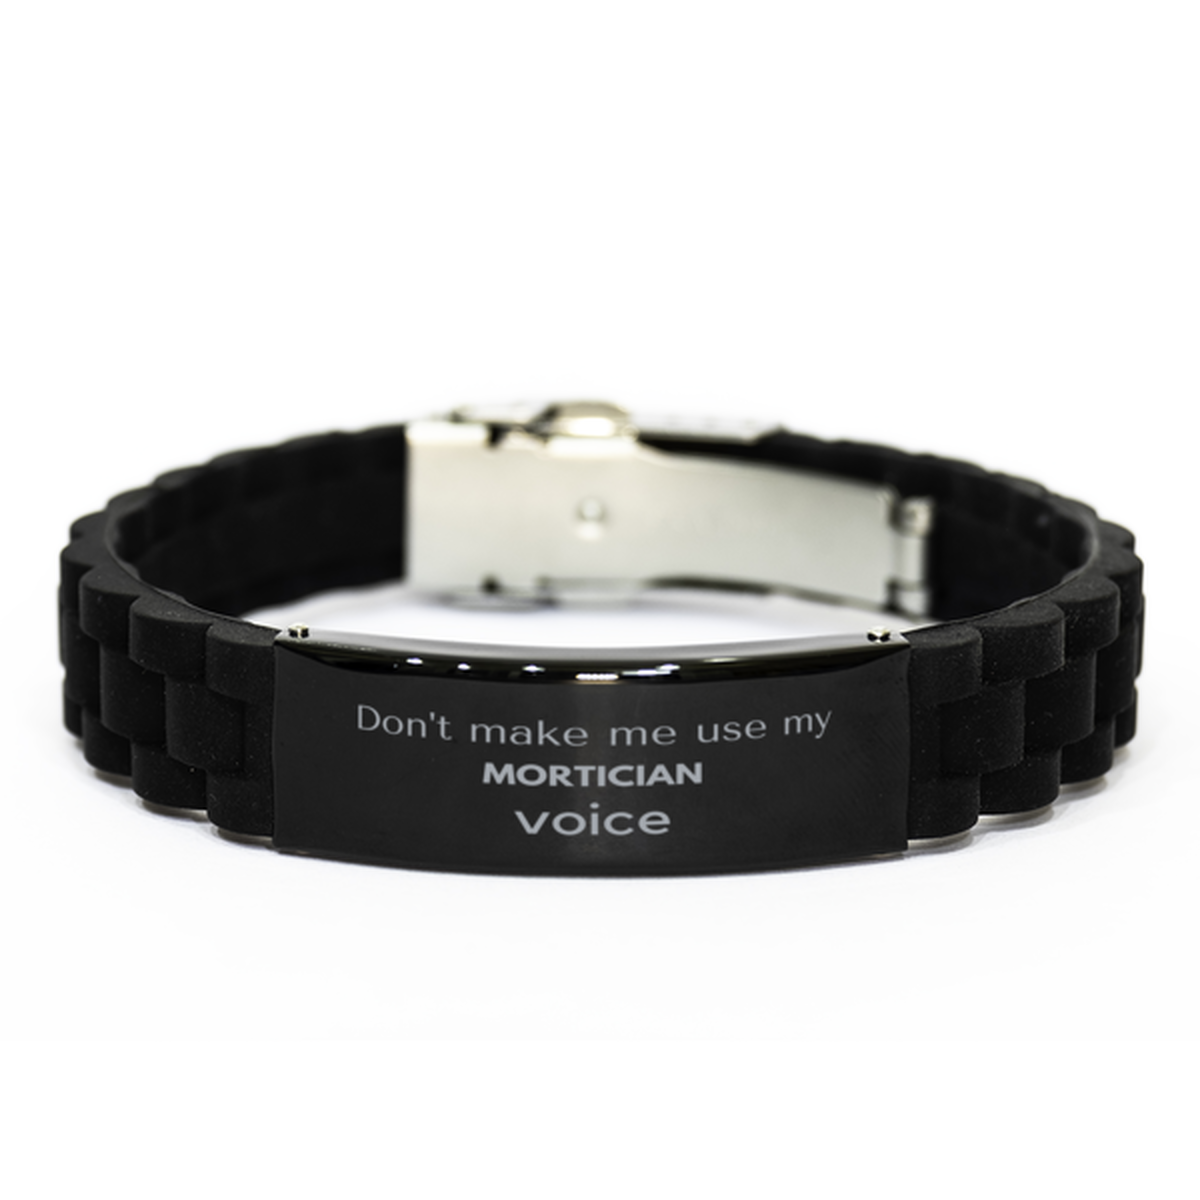 Don't make me use my Mortician voice, Sarcasm Mortician Gifts, Christmas Mortician Black Glidelock Clasp Bracelet Birthday Unique Gifts For Mortician Coworkers, Men, Women, Colleague, Friends